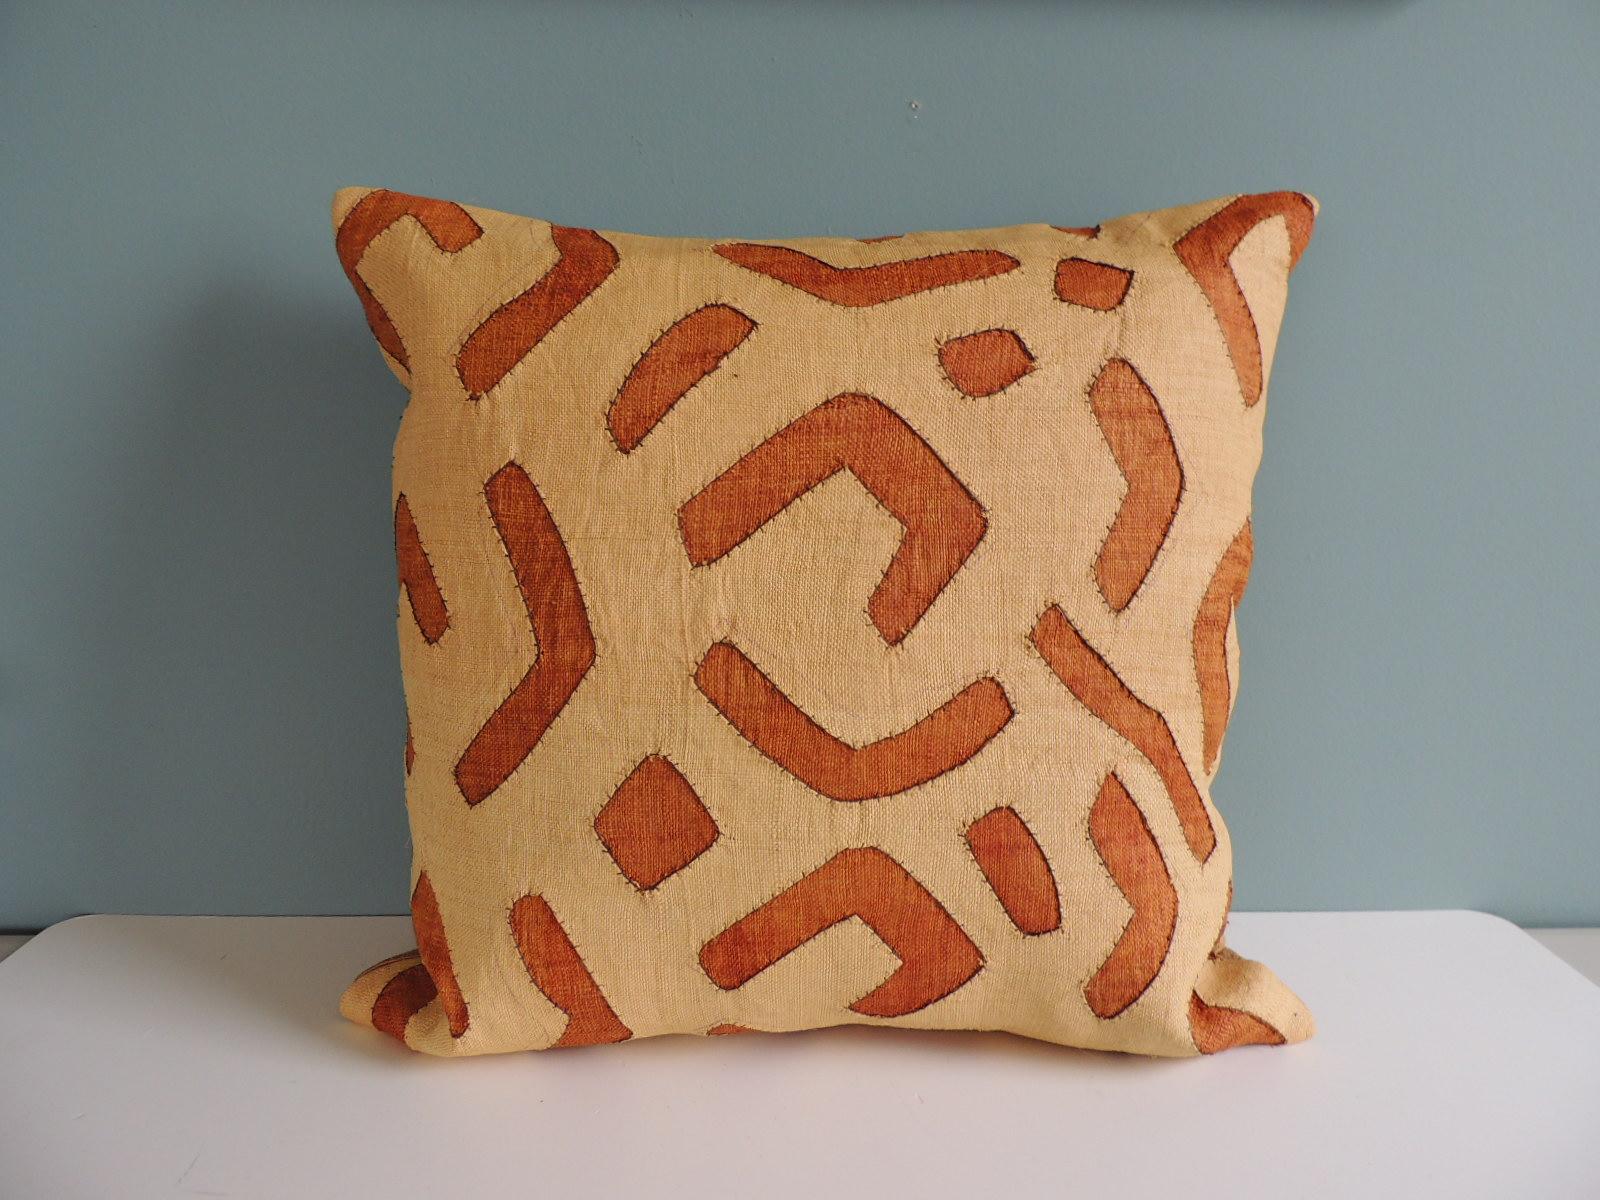 Vintage Tan and Camel African Raffia Kuba Textile Square Decorative Pillow with golden silk backing.
Decorative pillow handcrafted and designed in the USA.
Closure by stitch (no zipper closure) with custom-made feather/Down pillow insert.
Offered By